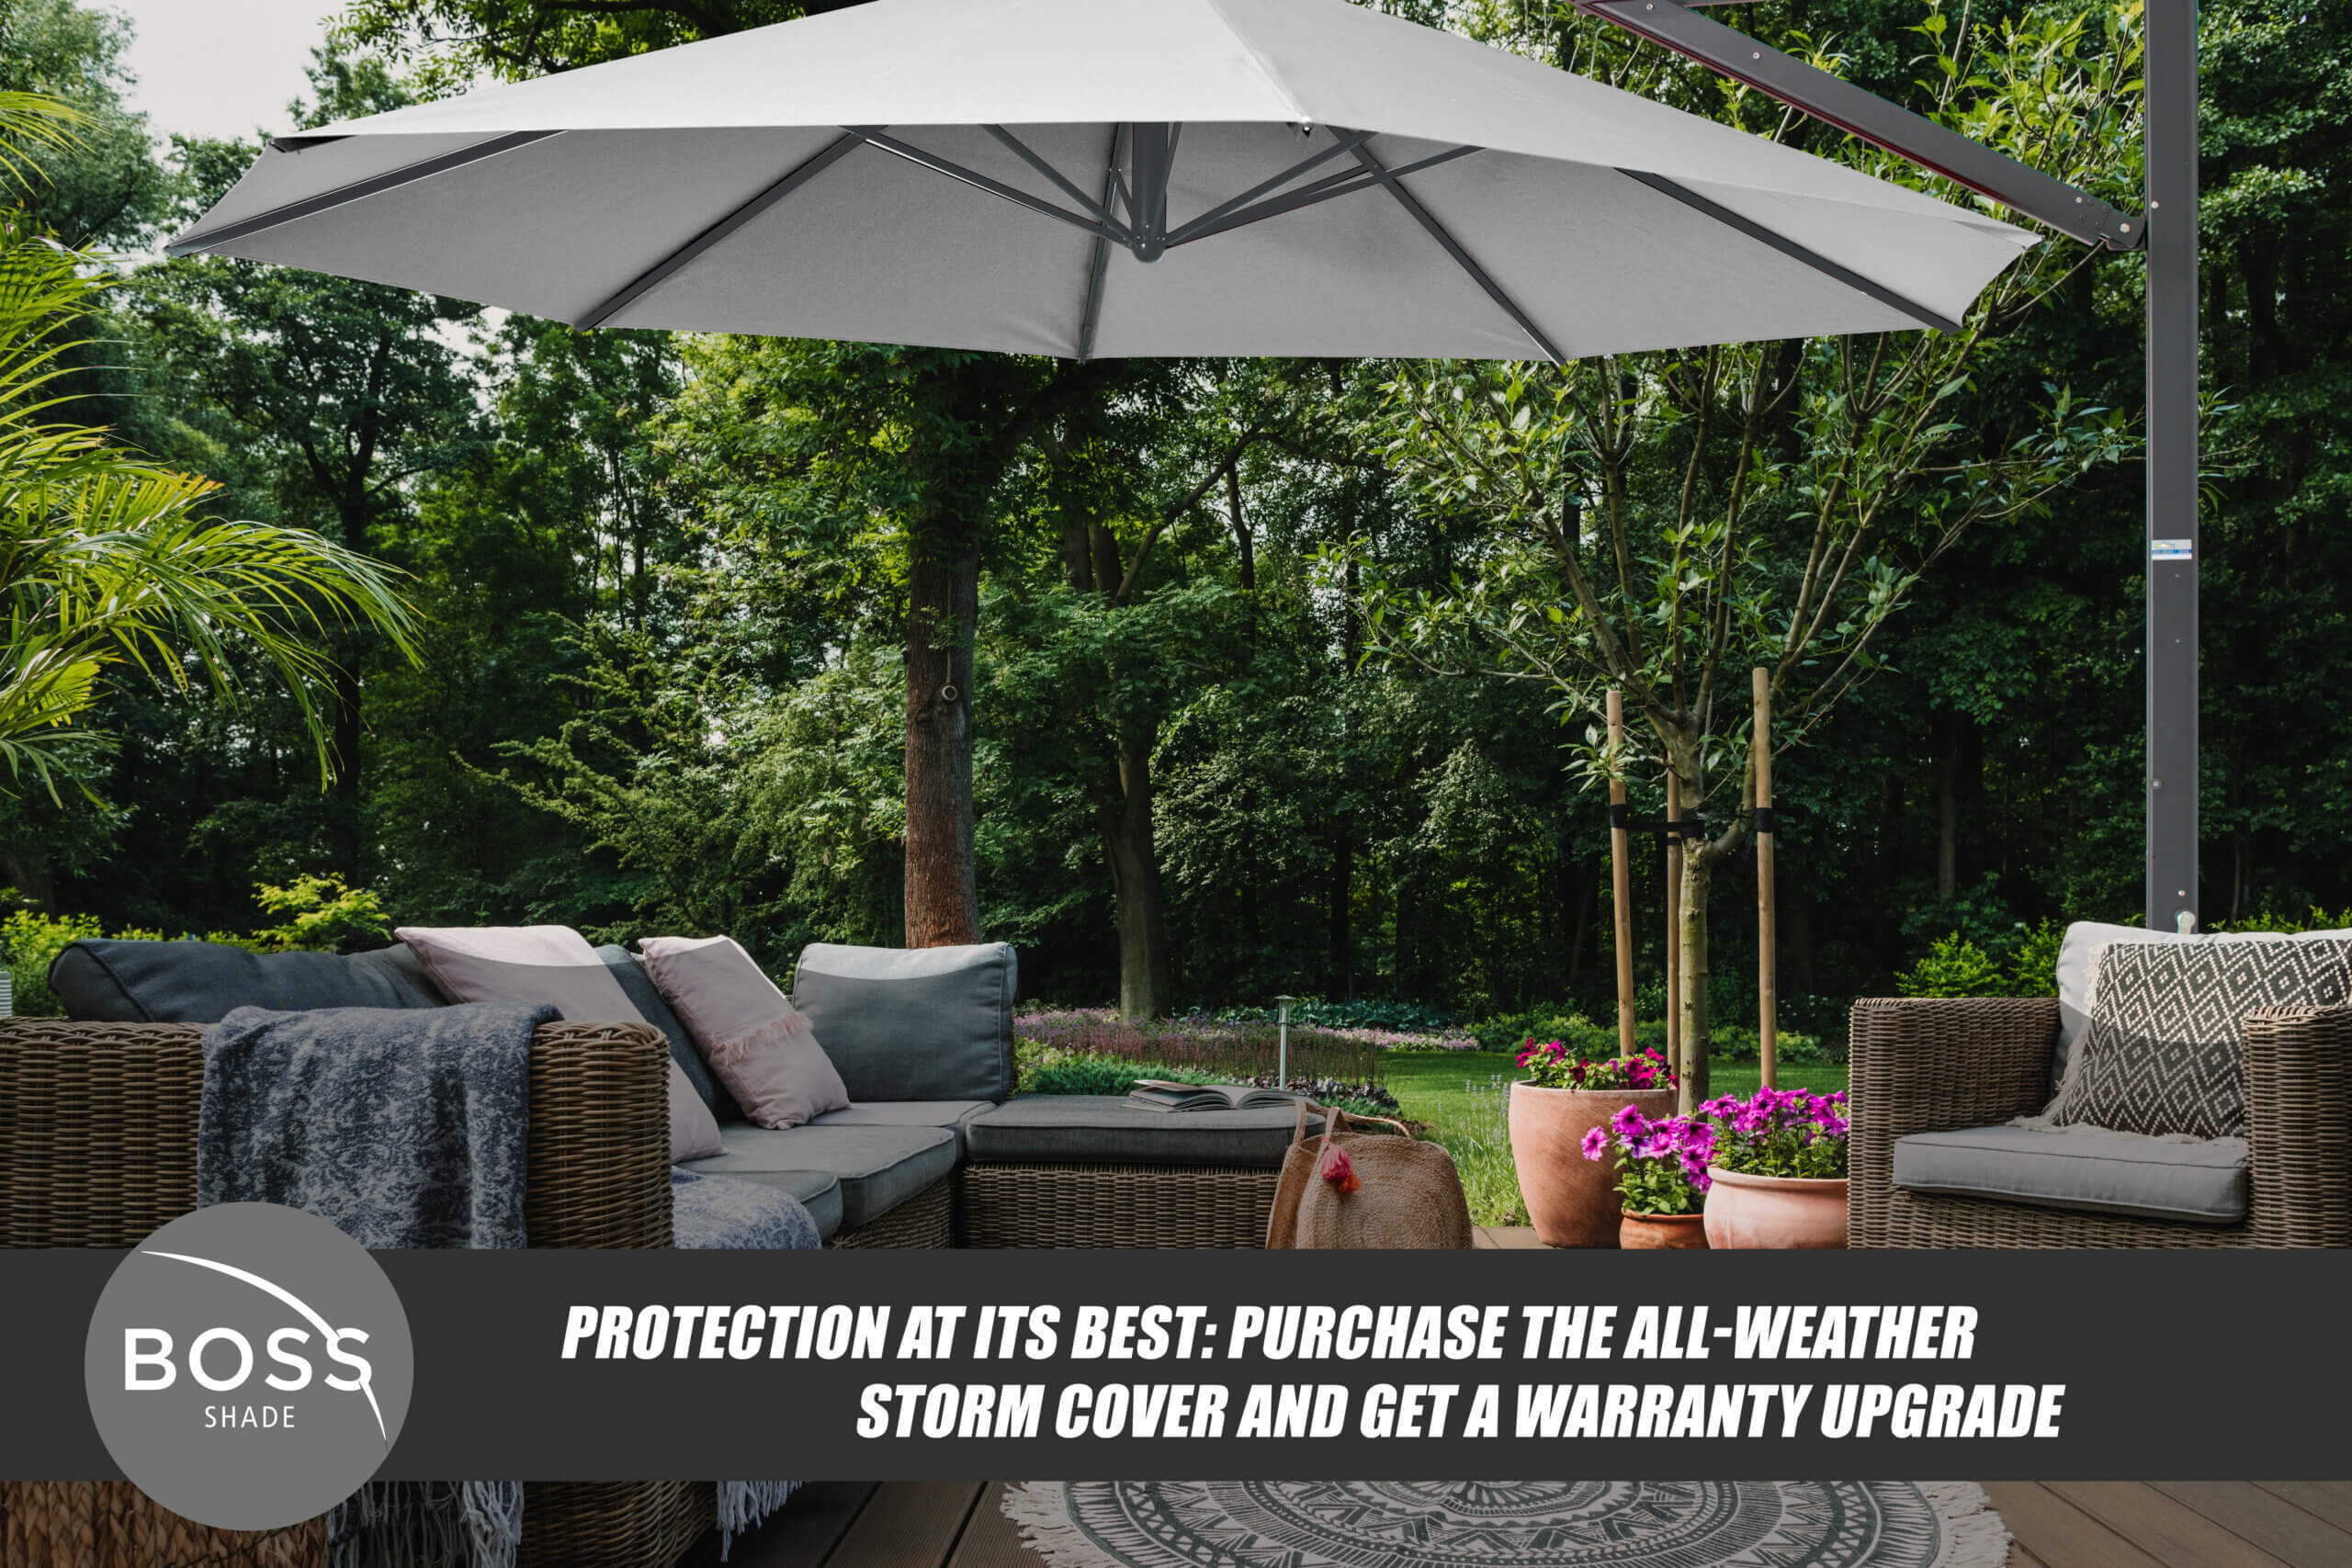 Umbrella Covers a must addition when buying a cantilever umbrella